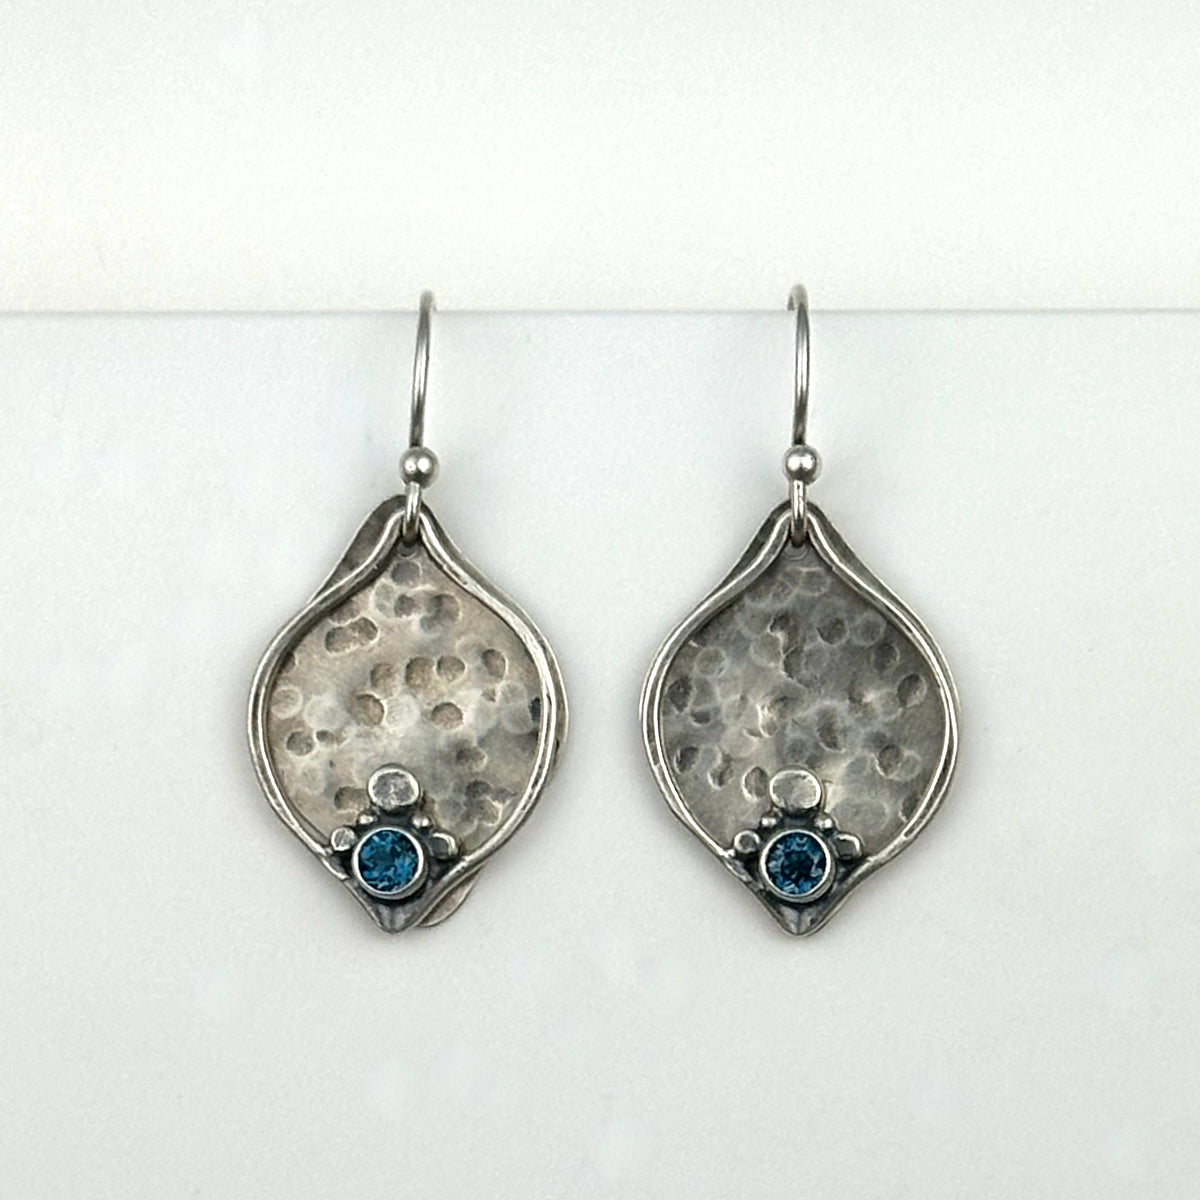 Drop Earrings With Frame and Blue Topaz